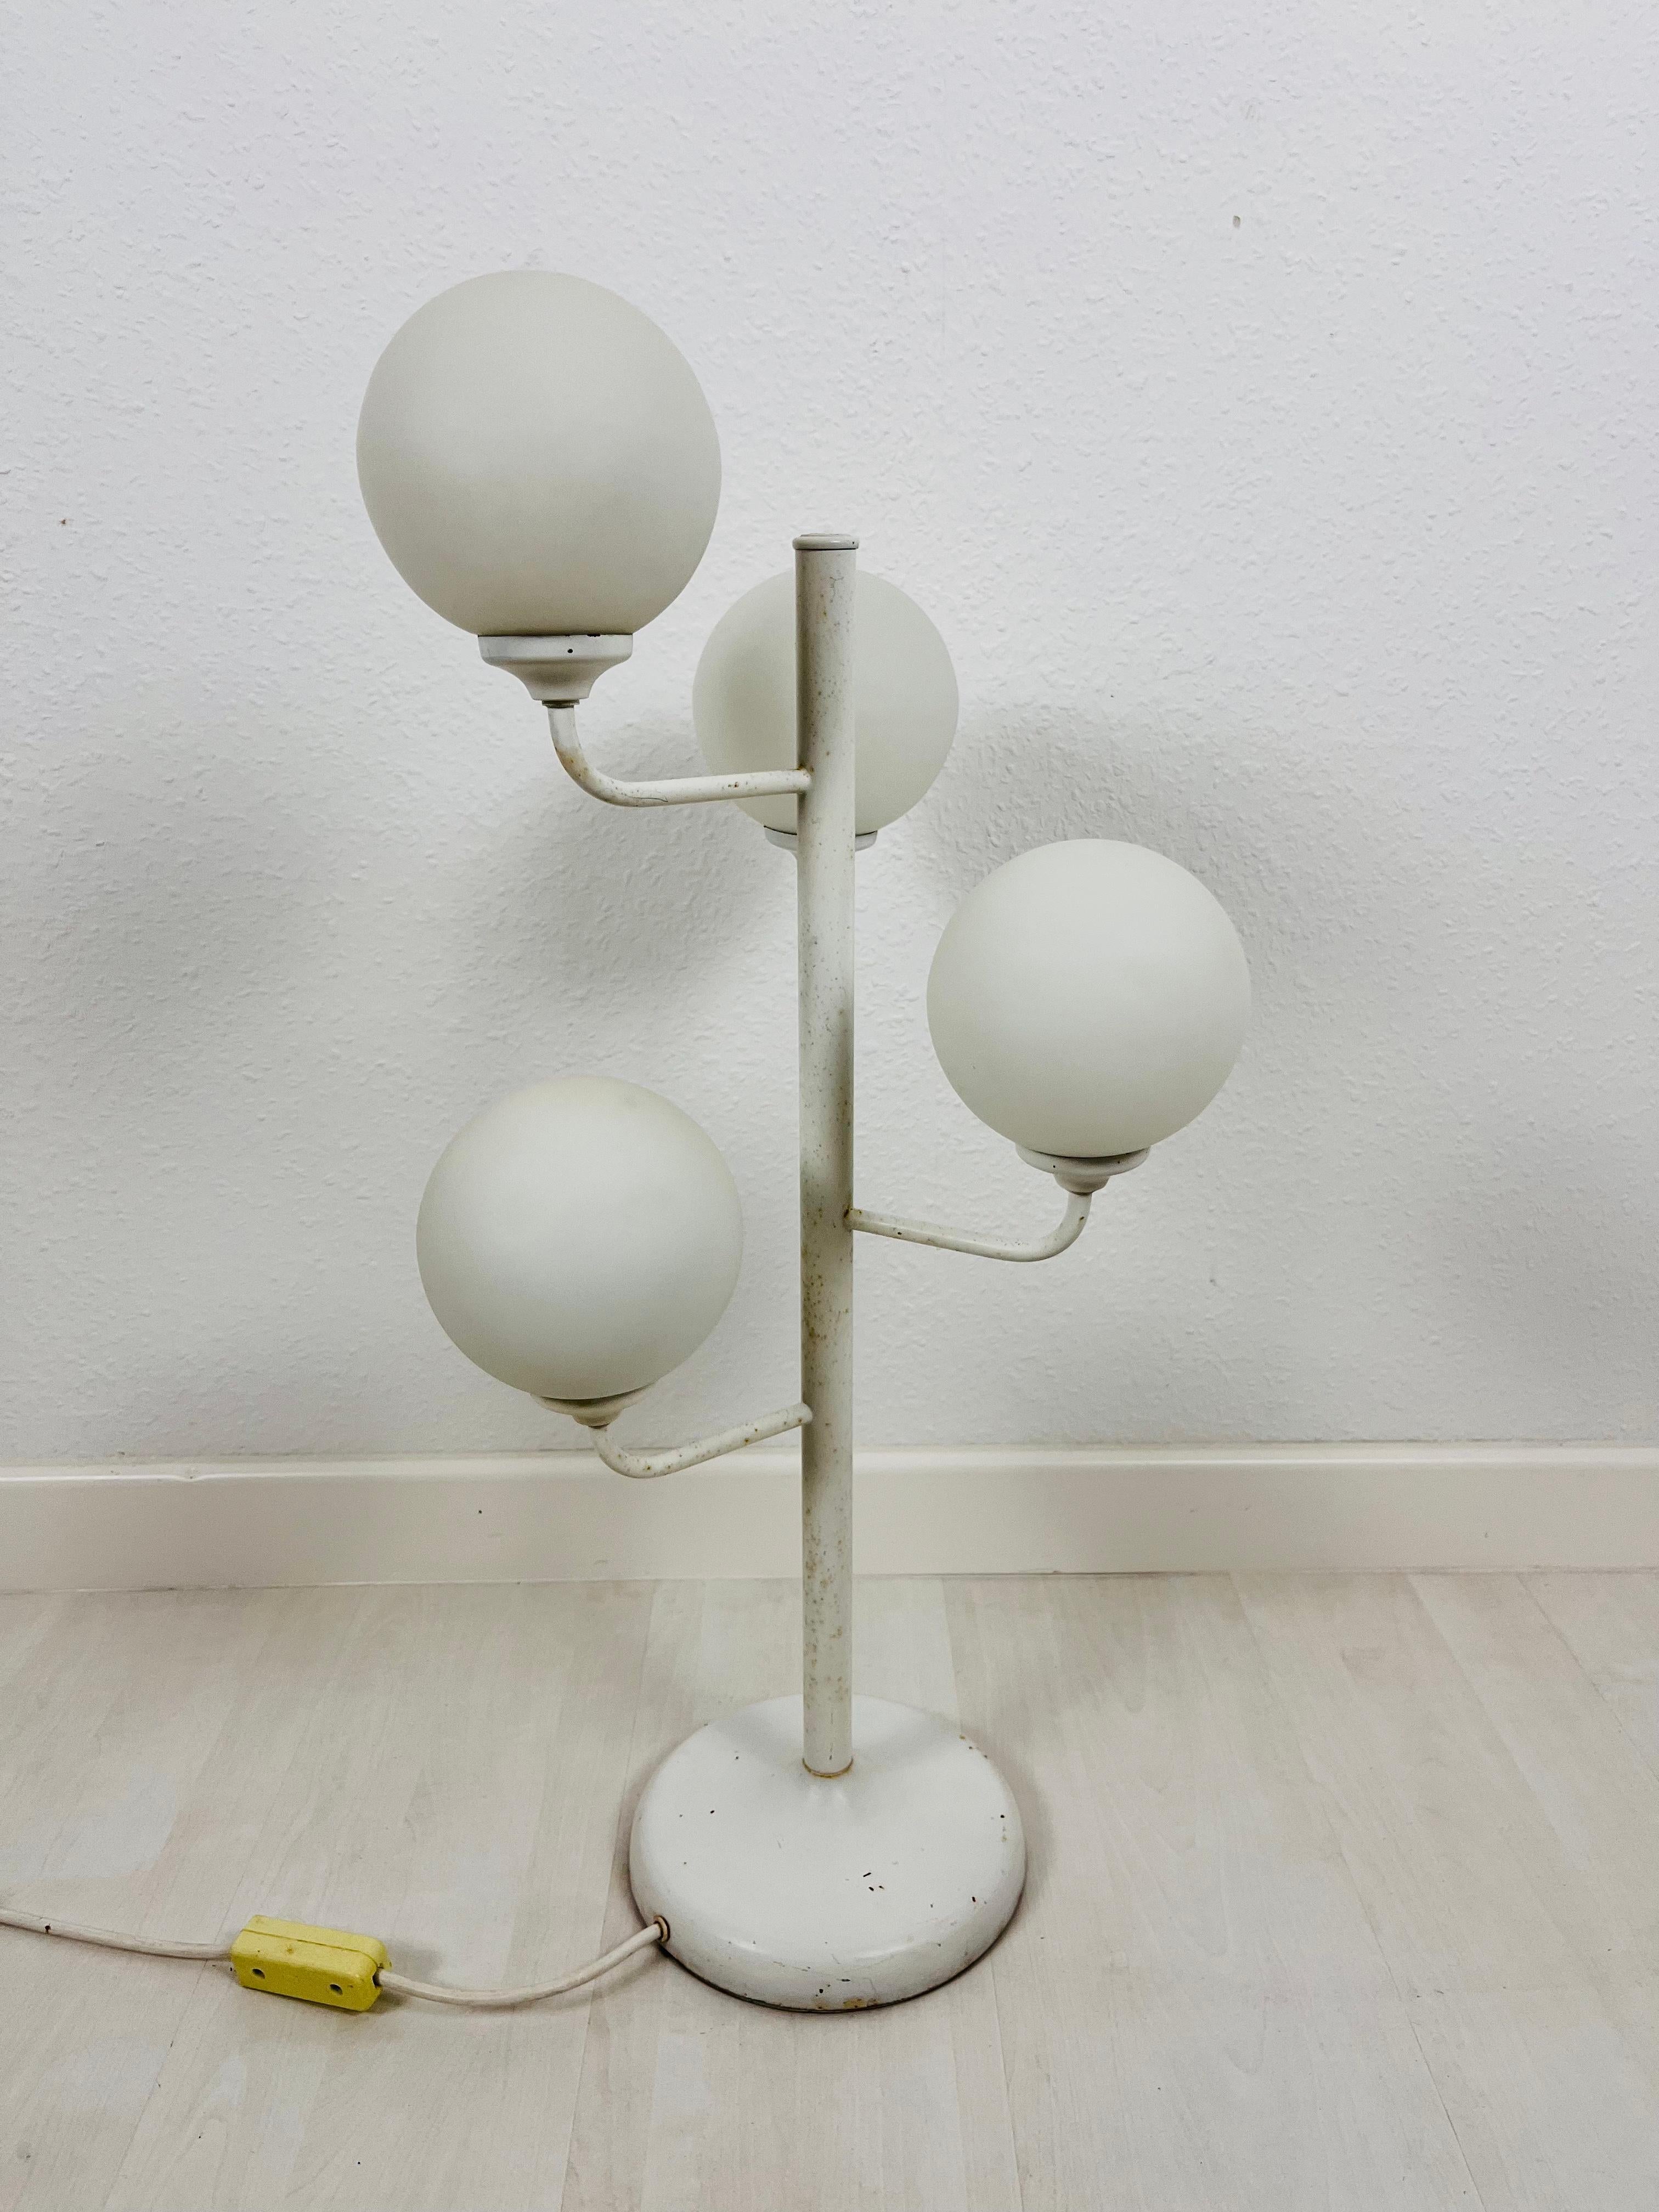 A midcentury floor lamp made in Germany in the 1960s. It is fascinating with its Space Age design and four ball shaped opaque balls. The bottom of the light is made of full metal. The bar is also made of metal including the arms.

Very good vintage